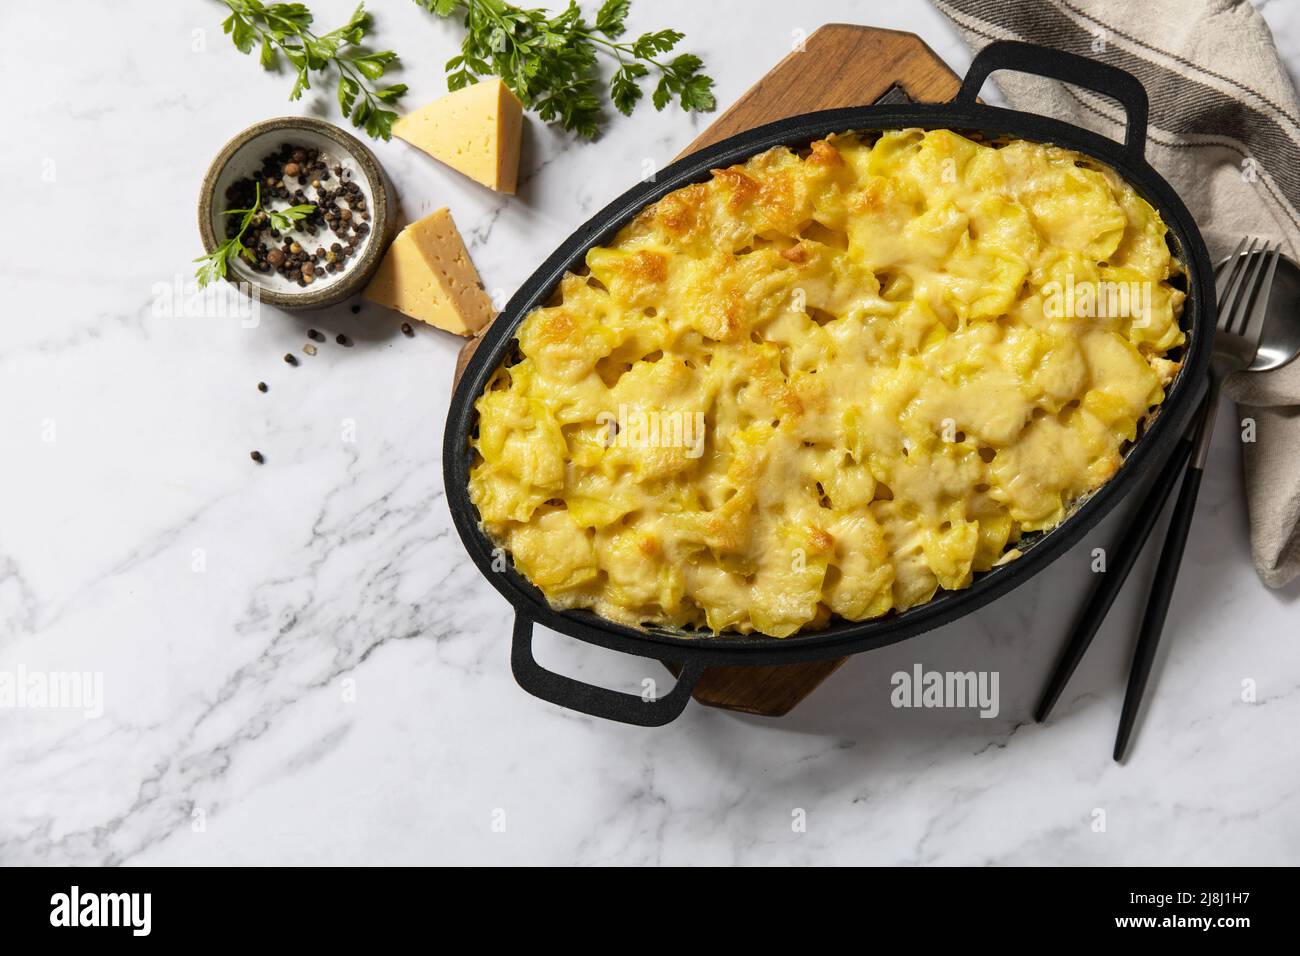 Potato gratin, french cuisine. Healthy casserole or gratin with cream, gratin dauphinois on a gray stone table. Top view flat lay. Copy space. Stock Photo